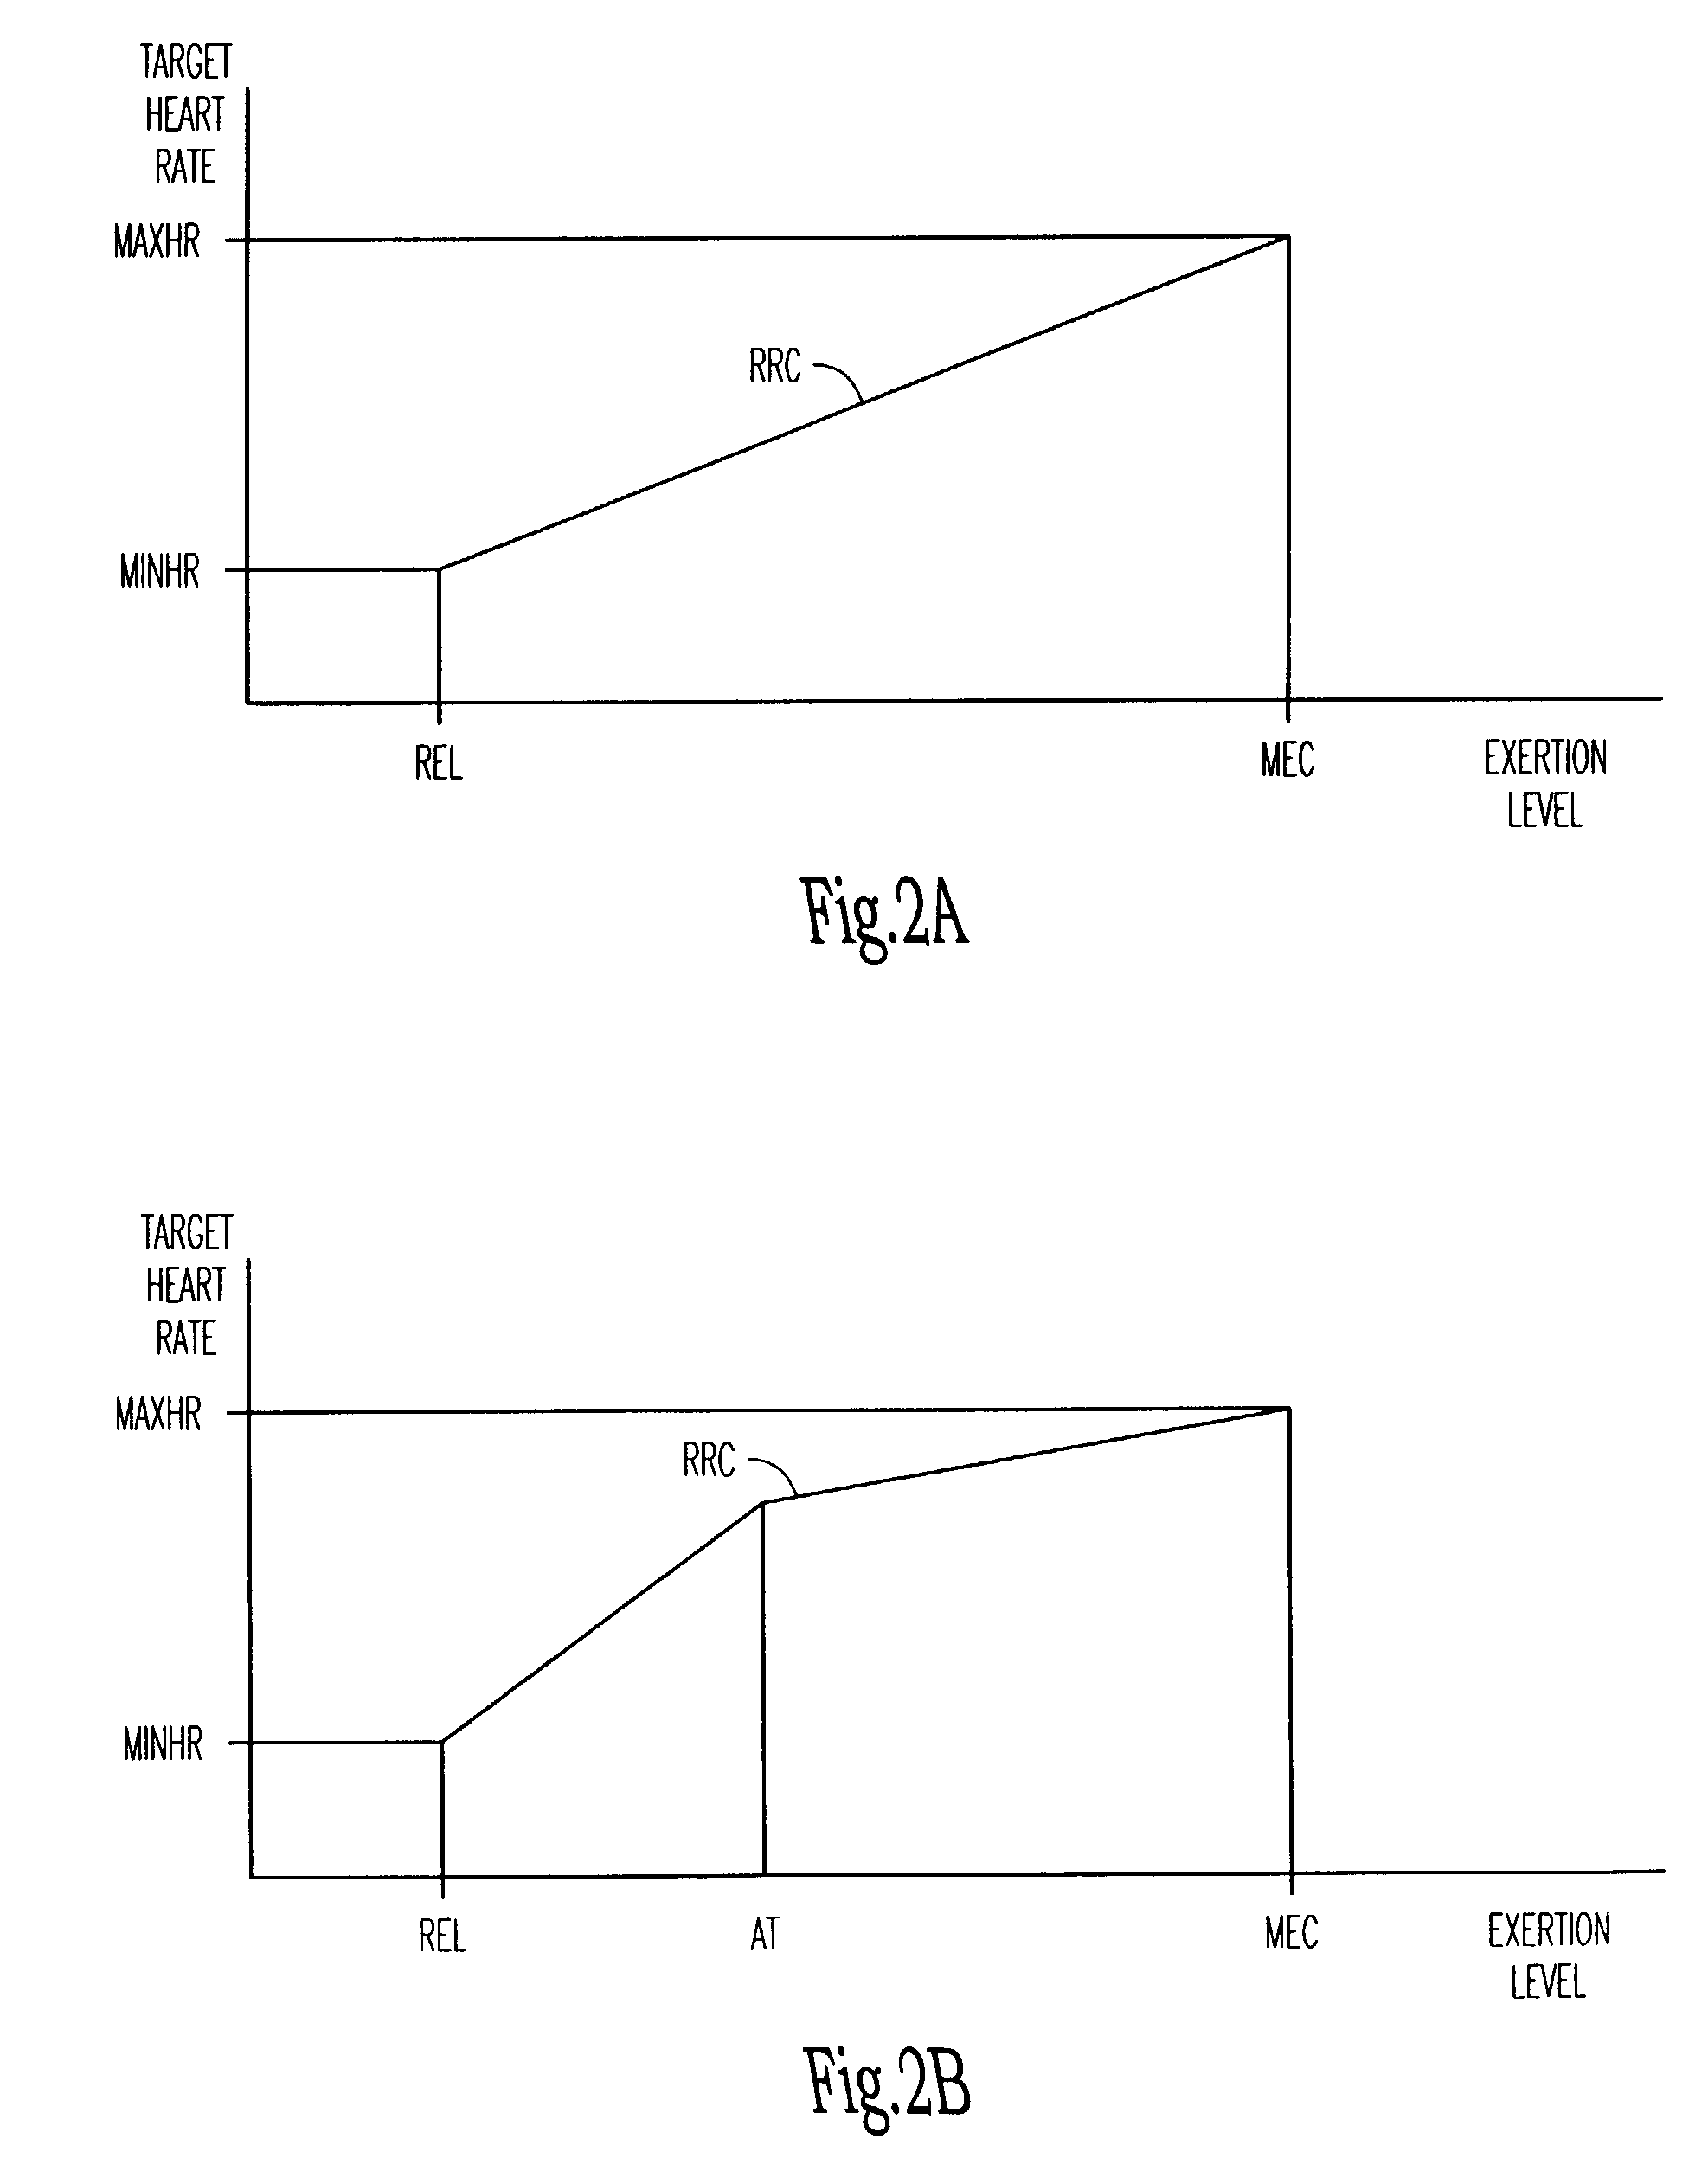 Adjustment of the breakpoint of the rate response curve based on minute ventilation values